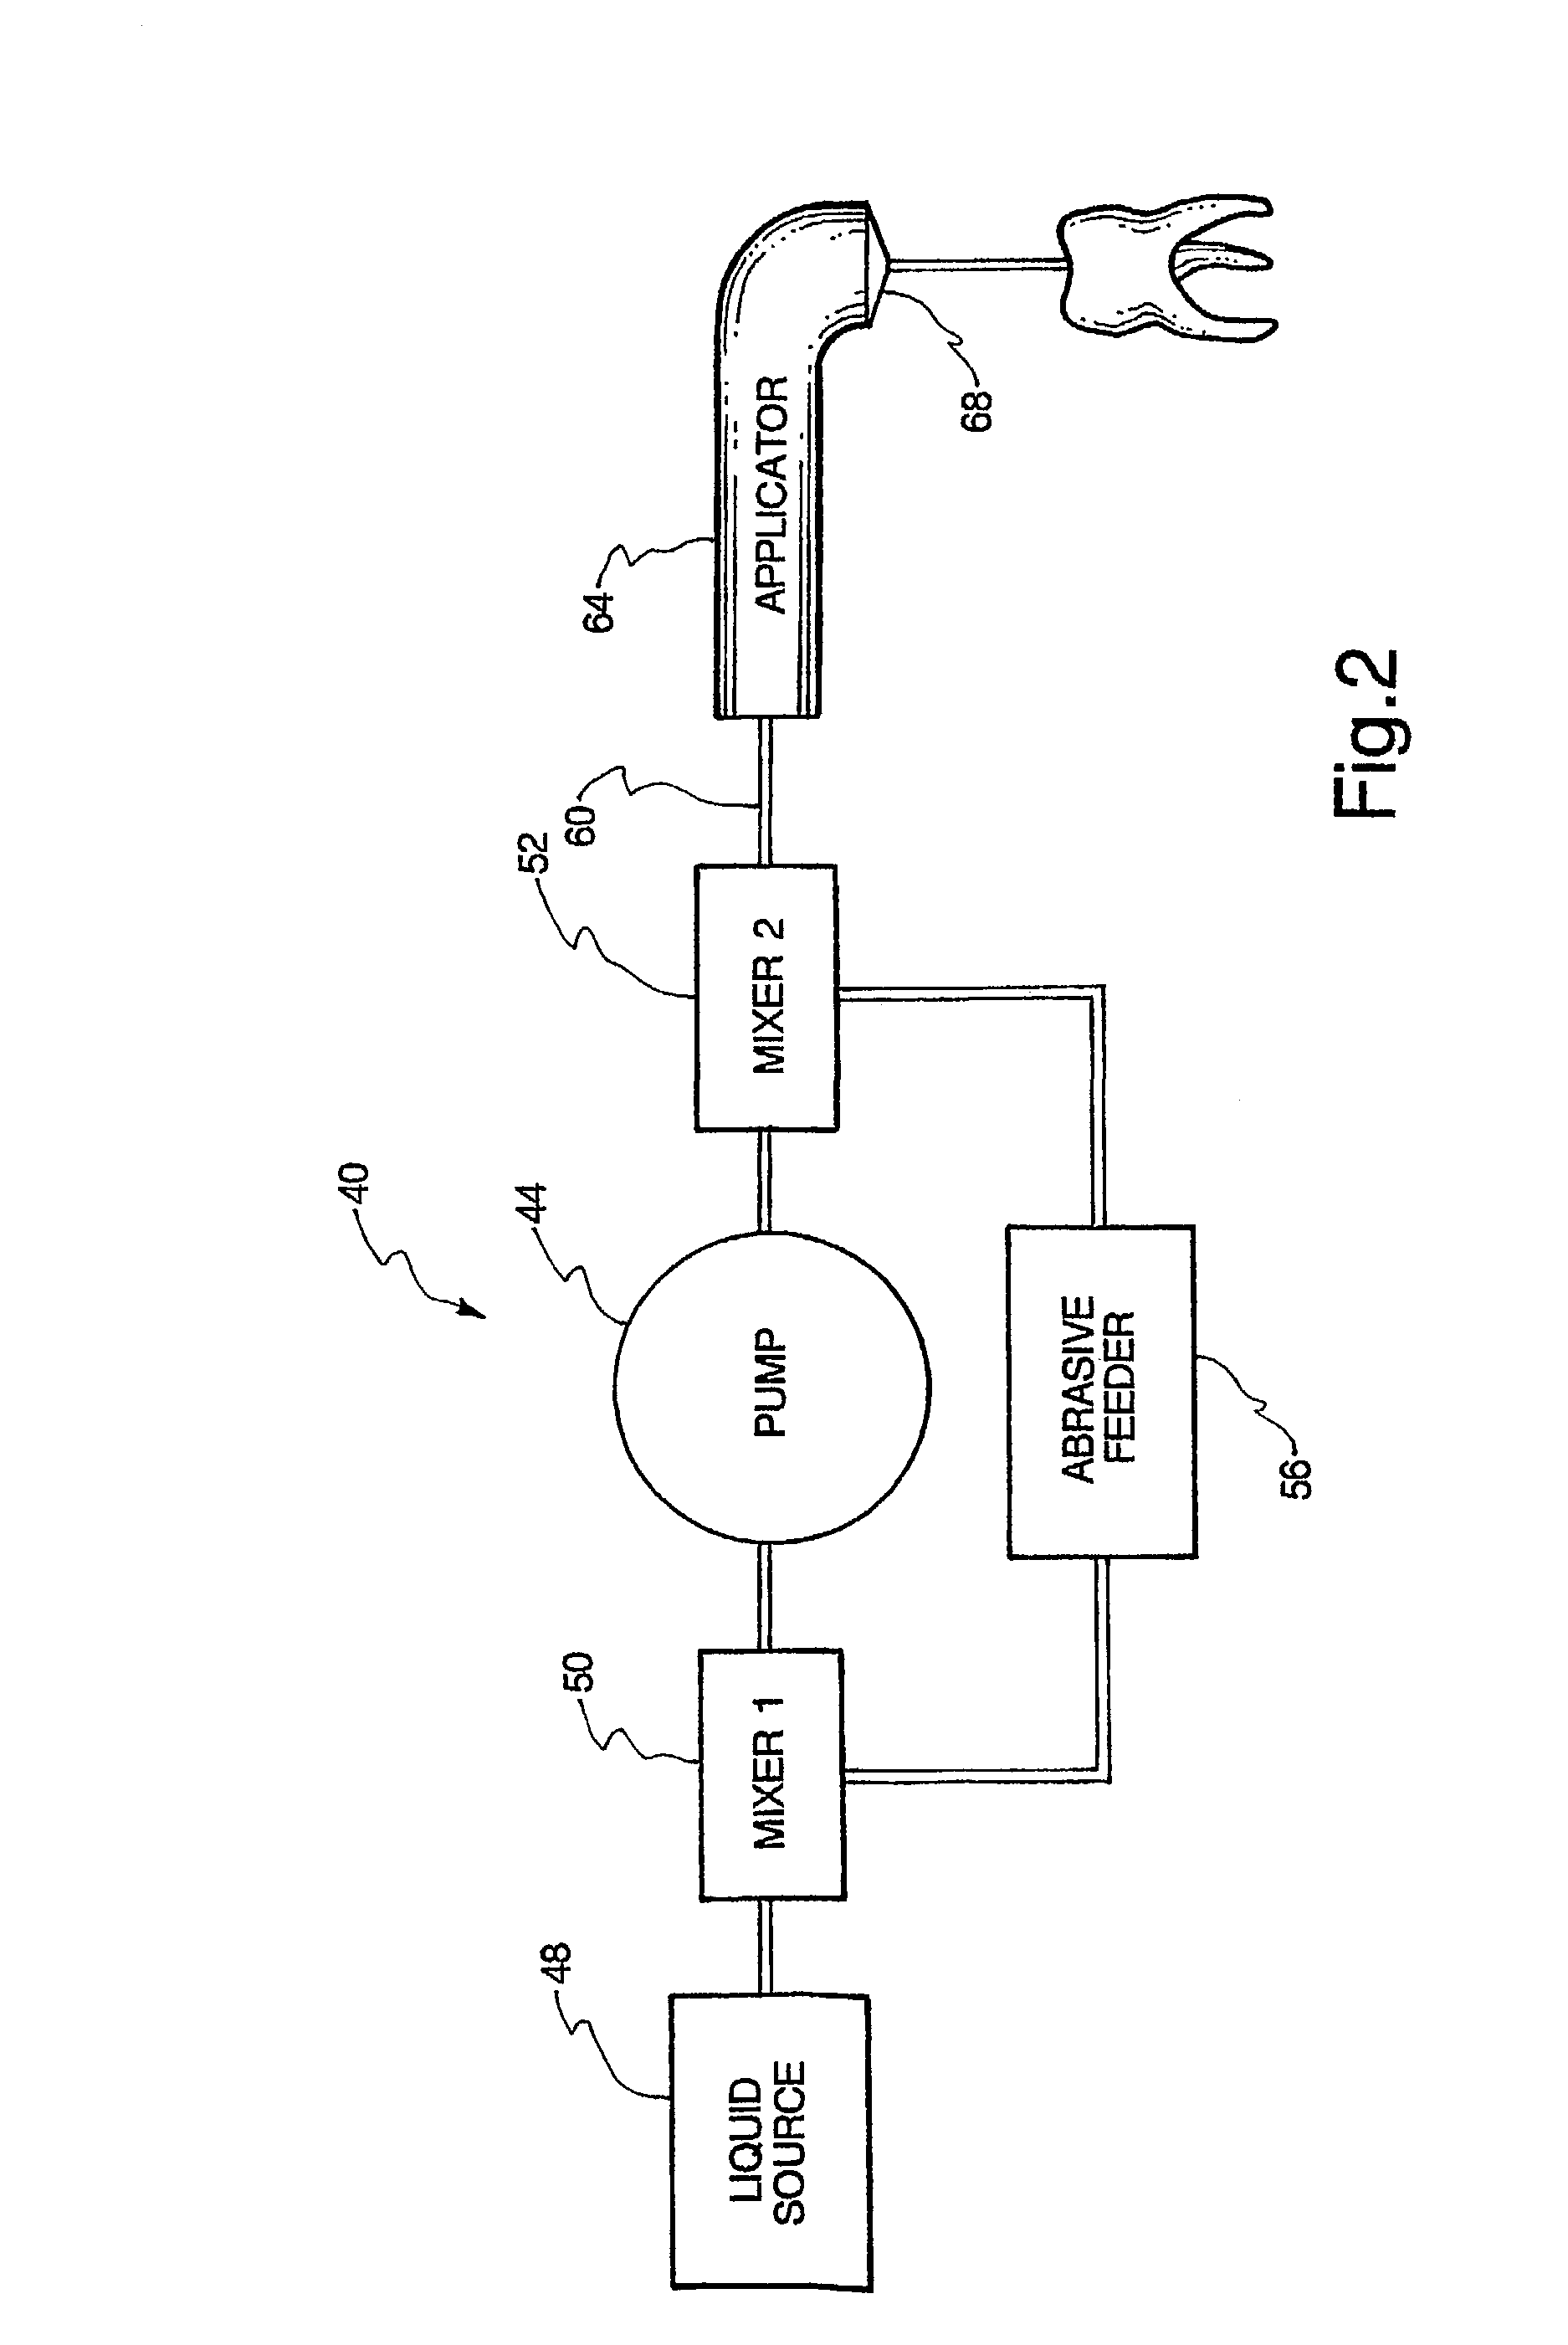 Method and apparatus for drilling teeth with a pressurized water stream